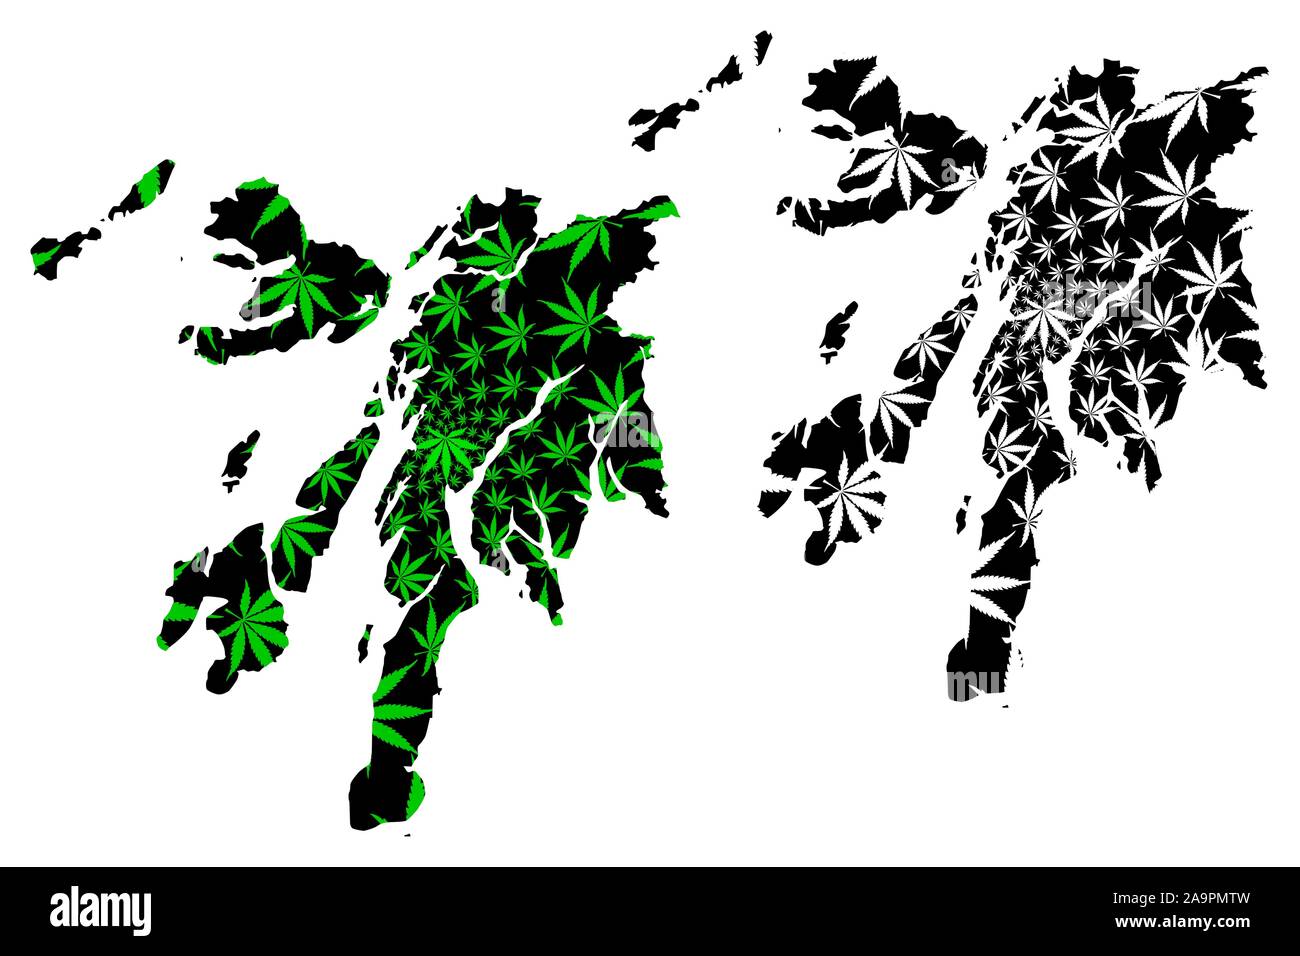 Argyll and Bute (United Kingdom, Scotland, Local government in Scotland) map is designed cannabis leaf green and black, Argyll and Bute map made of ma Stock Vector